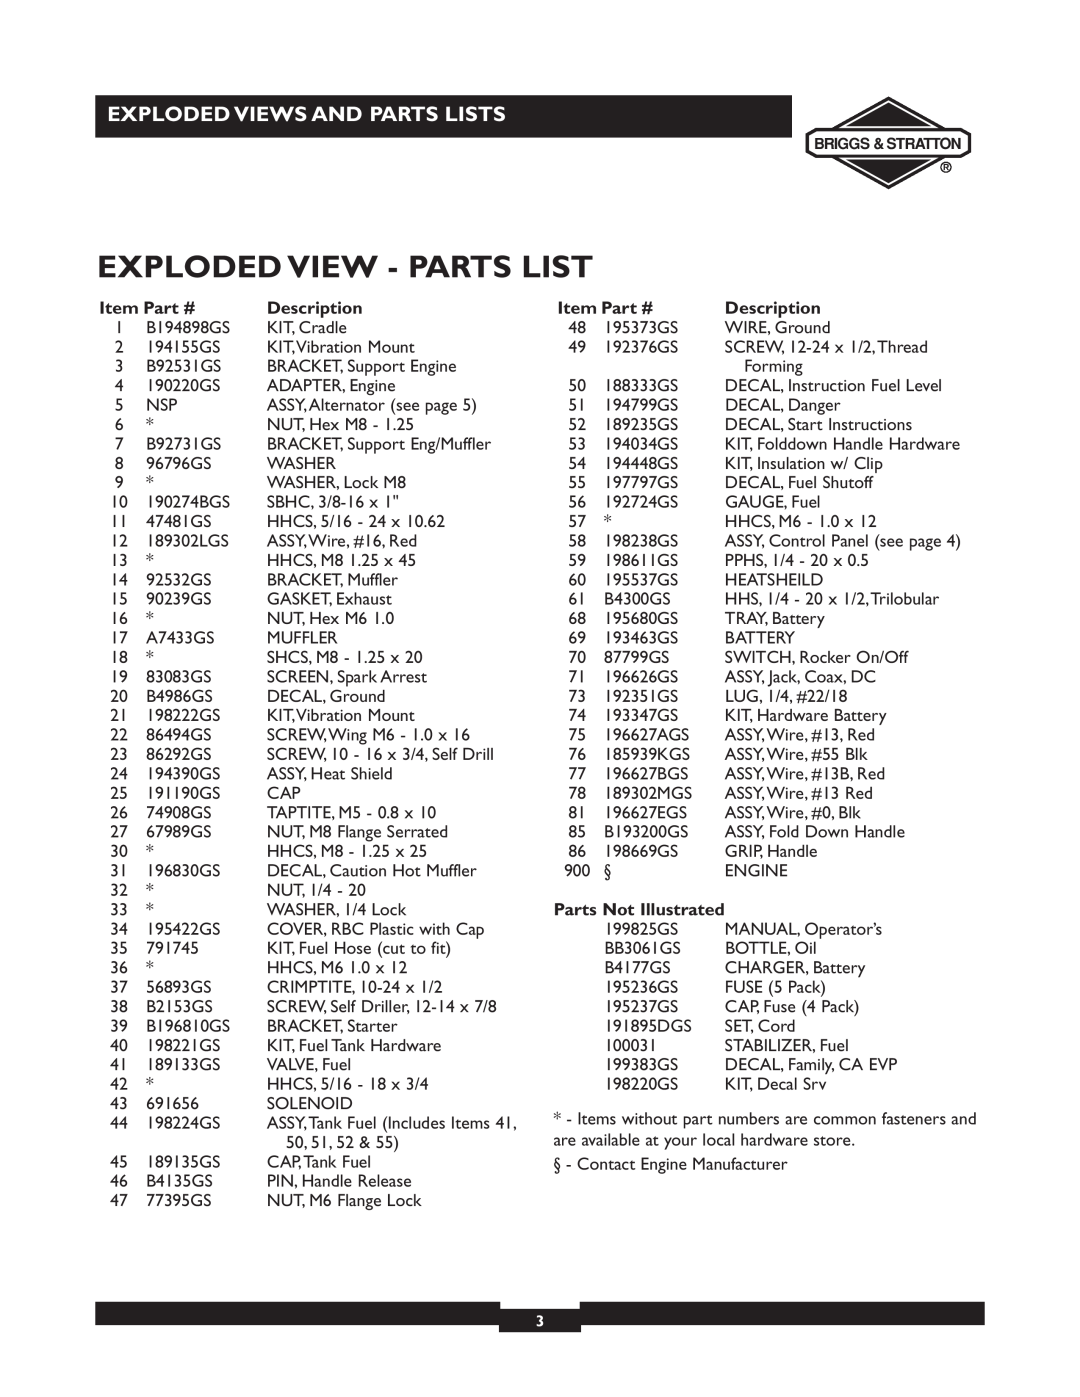 Briggs & Stratton 30244 Exploded View - Parts List, Description, Parts Not Illustrated, Exploded Views And Parts Lists 